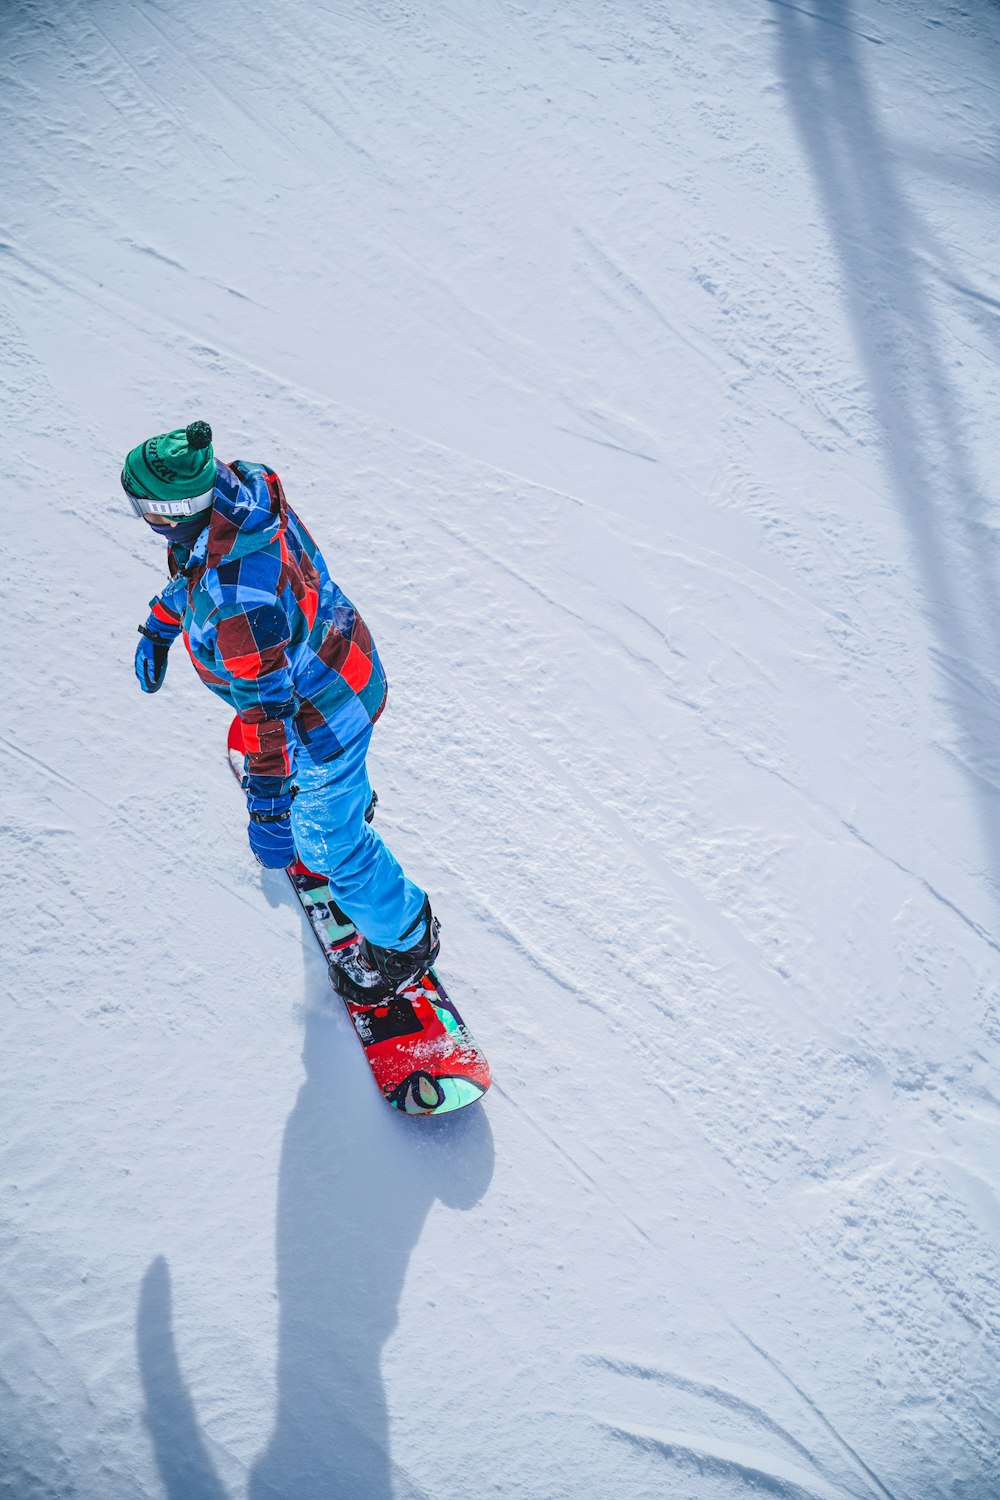 person in blue red and white jacket and pants riding ski blades on snow covered ground